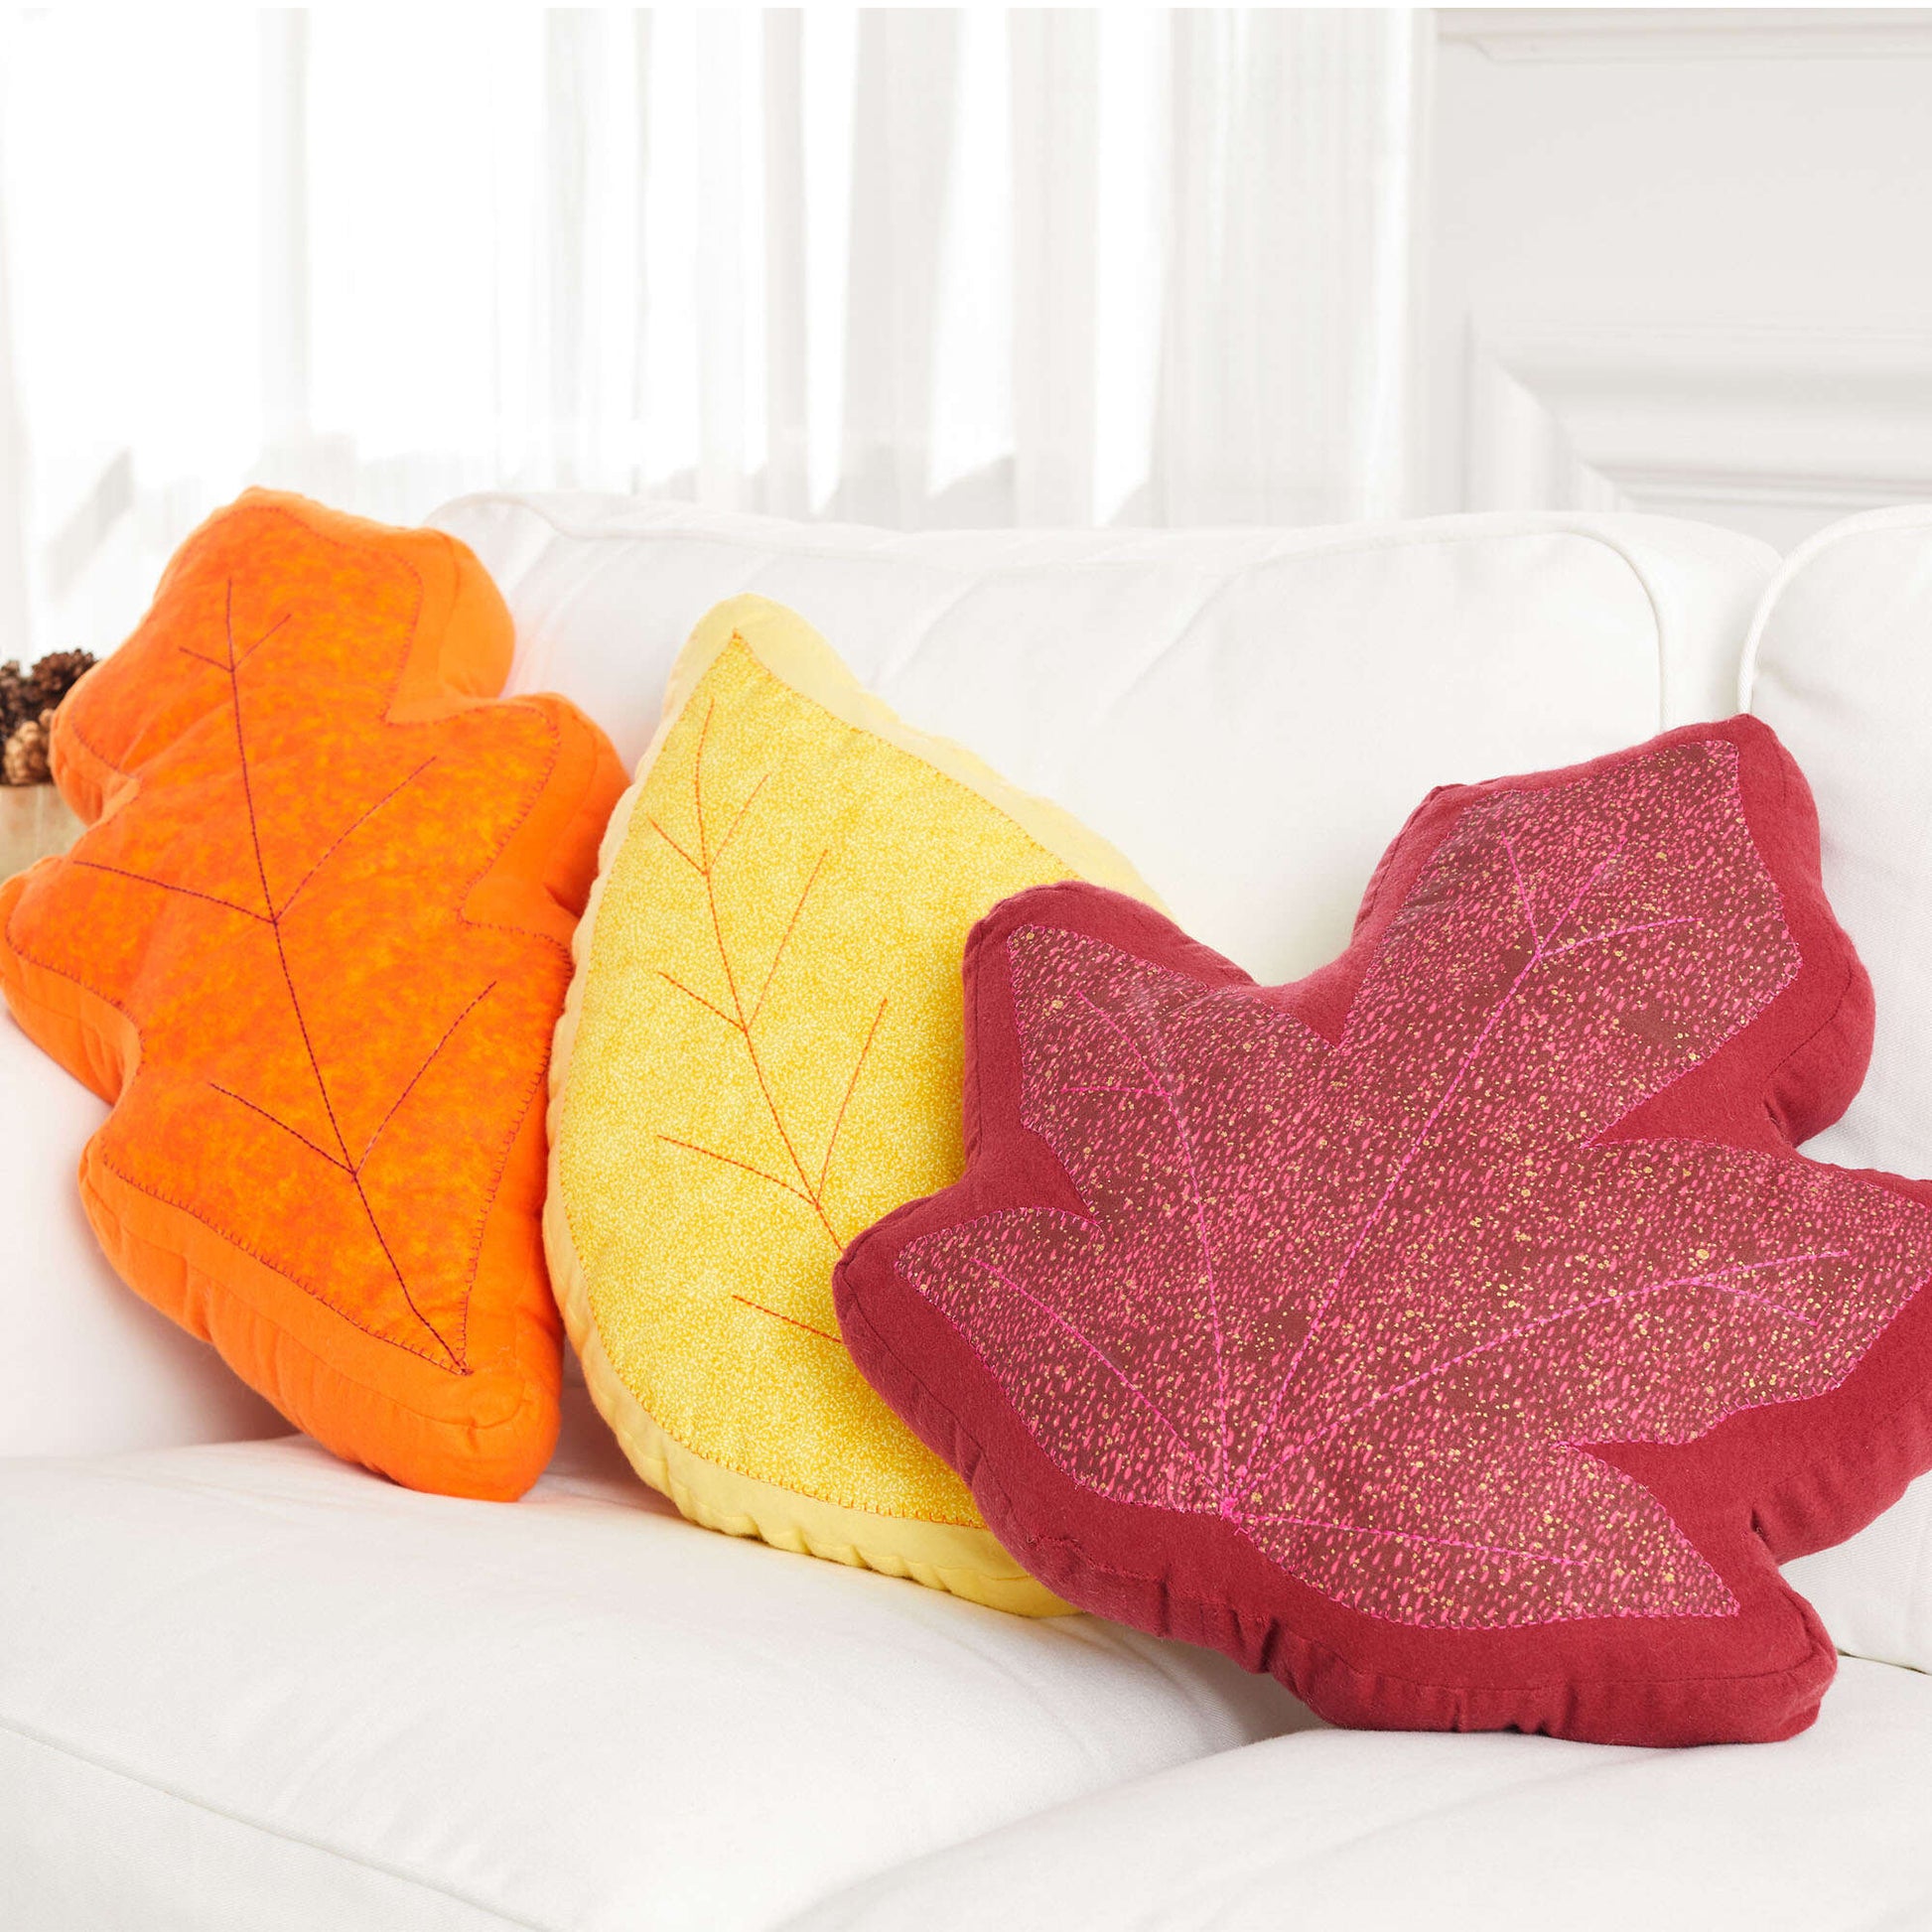 Free Coats & Clark Autumn Leaves Pillows Sewing Pattern